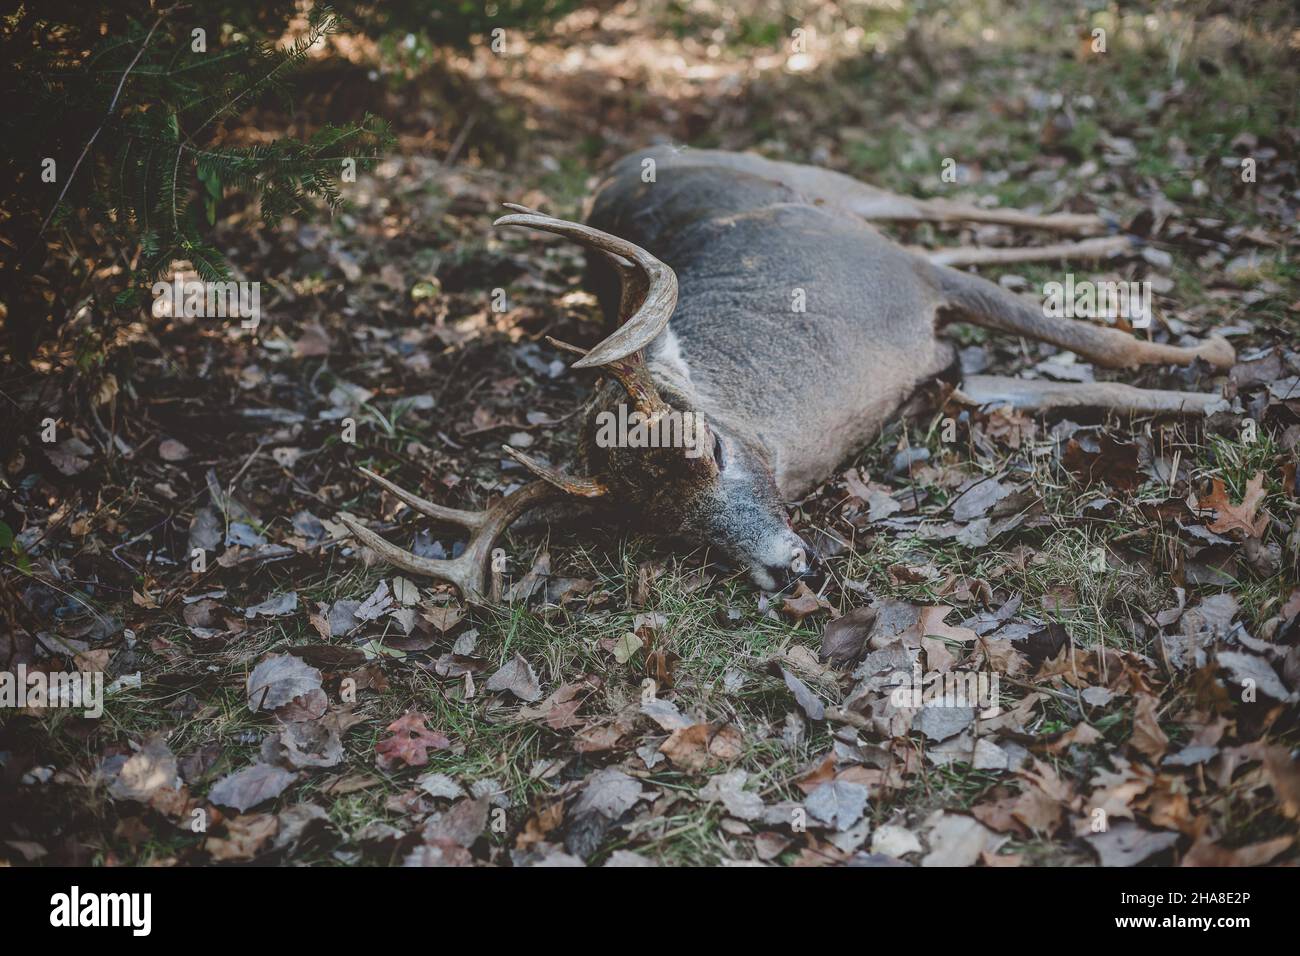 Dead 8 point buck laying in Wisconsin woods Stock Photo